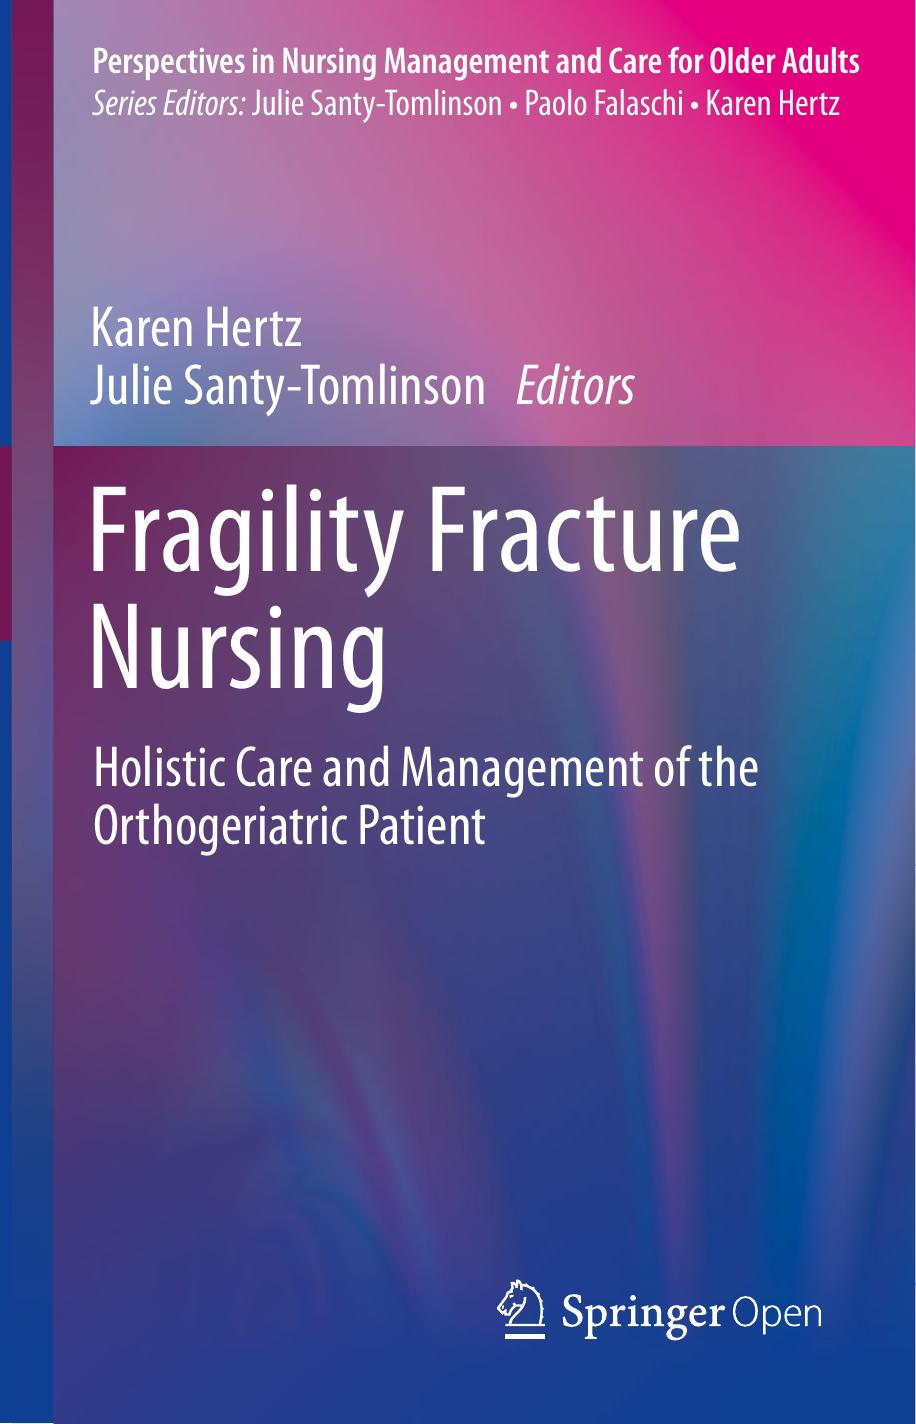 Fragility Fracture Nursing  Holistic Care and Management of the Orthogeriatric Patient 2018